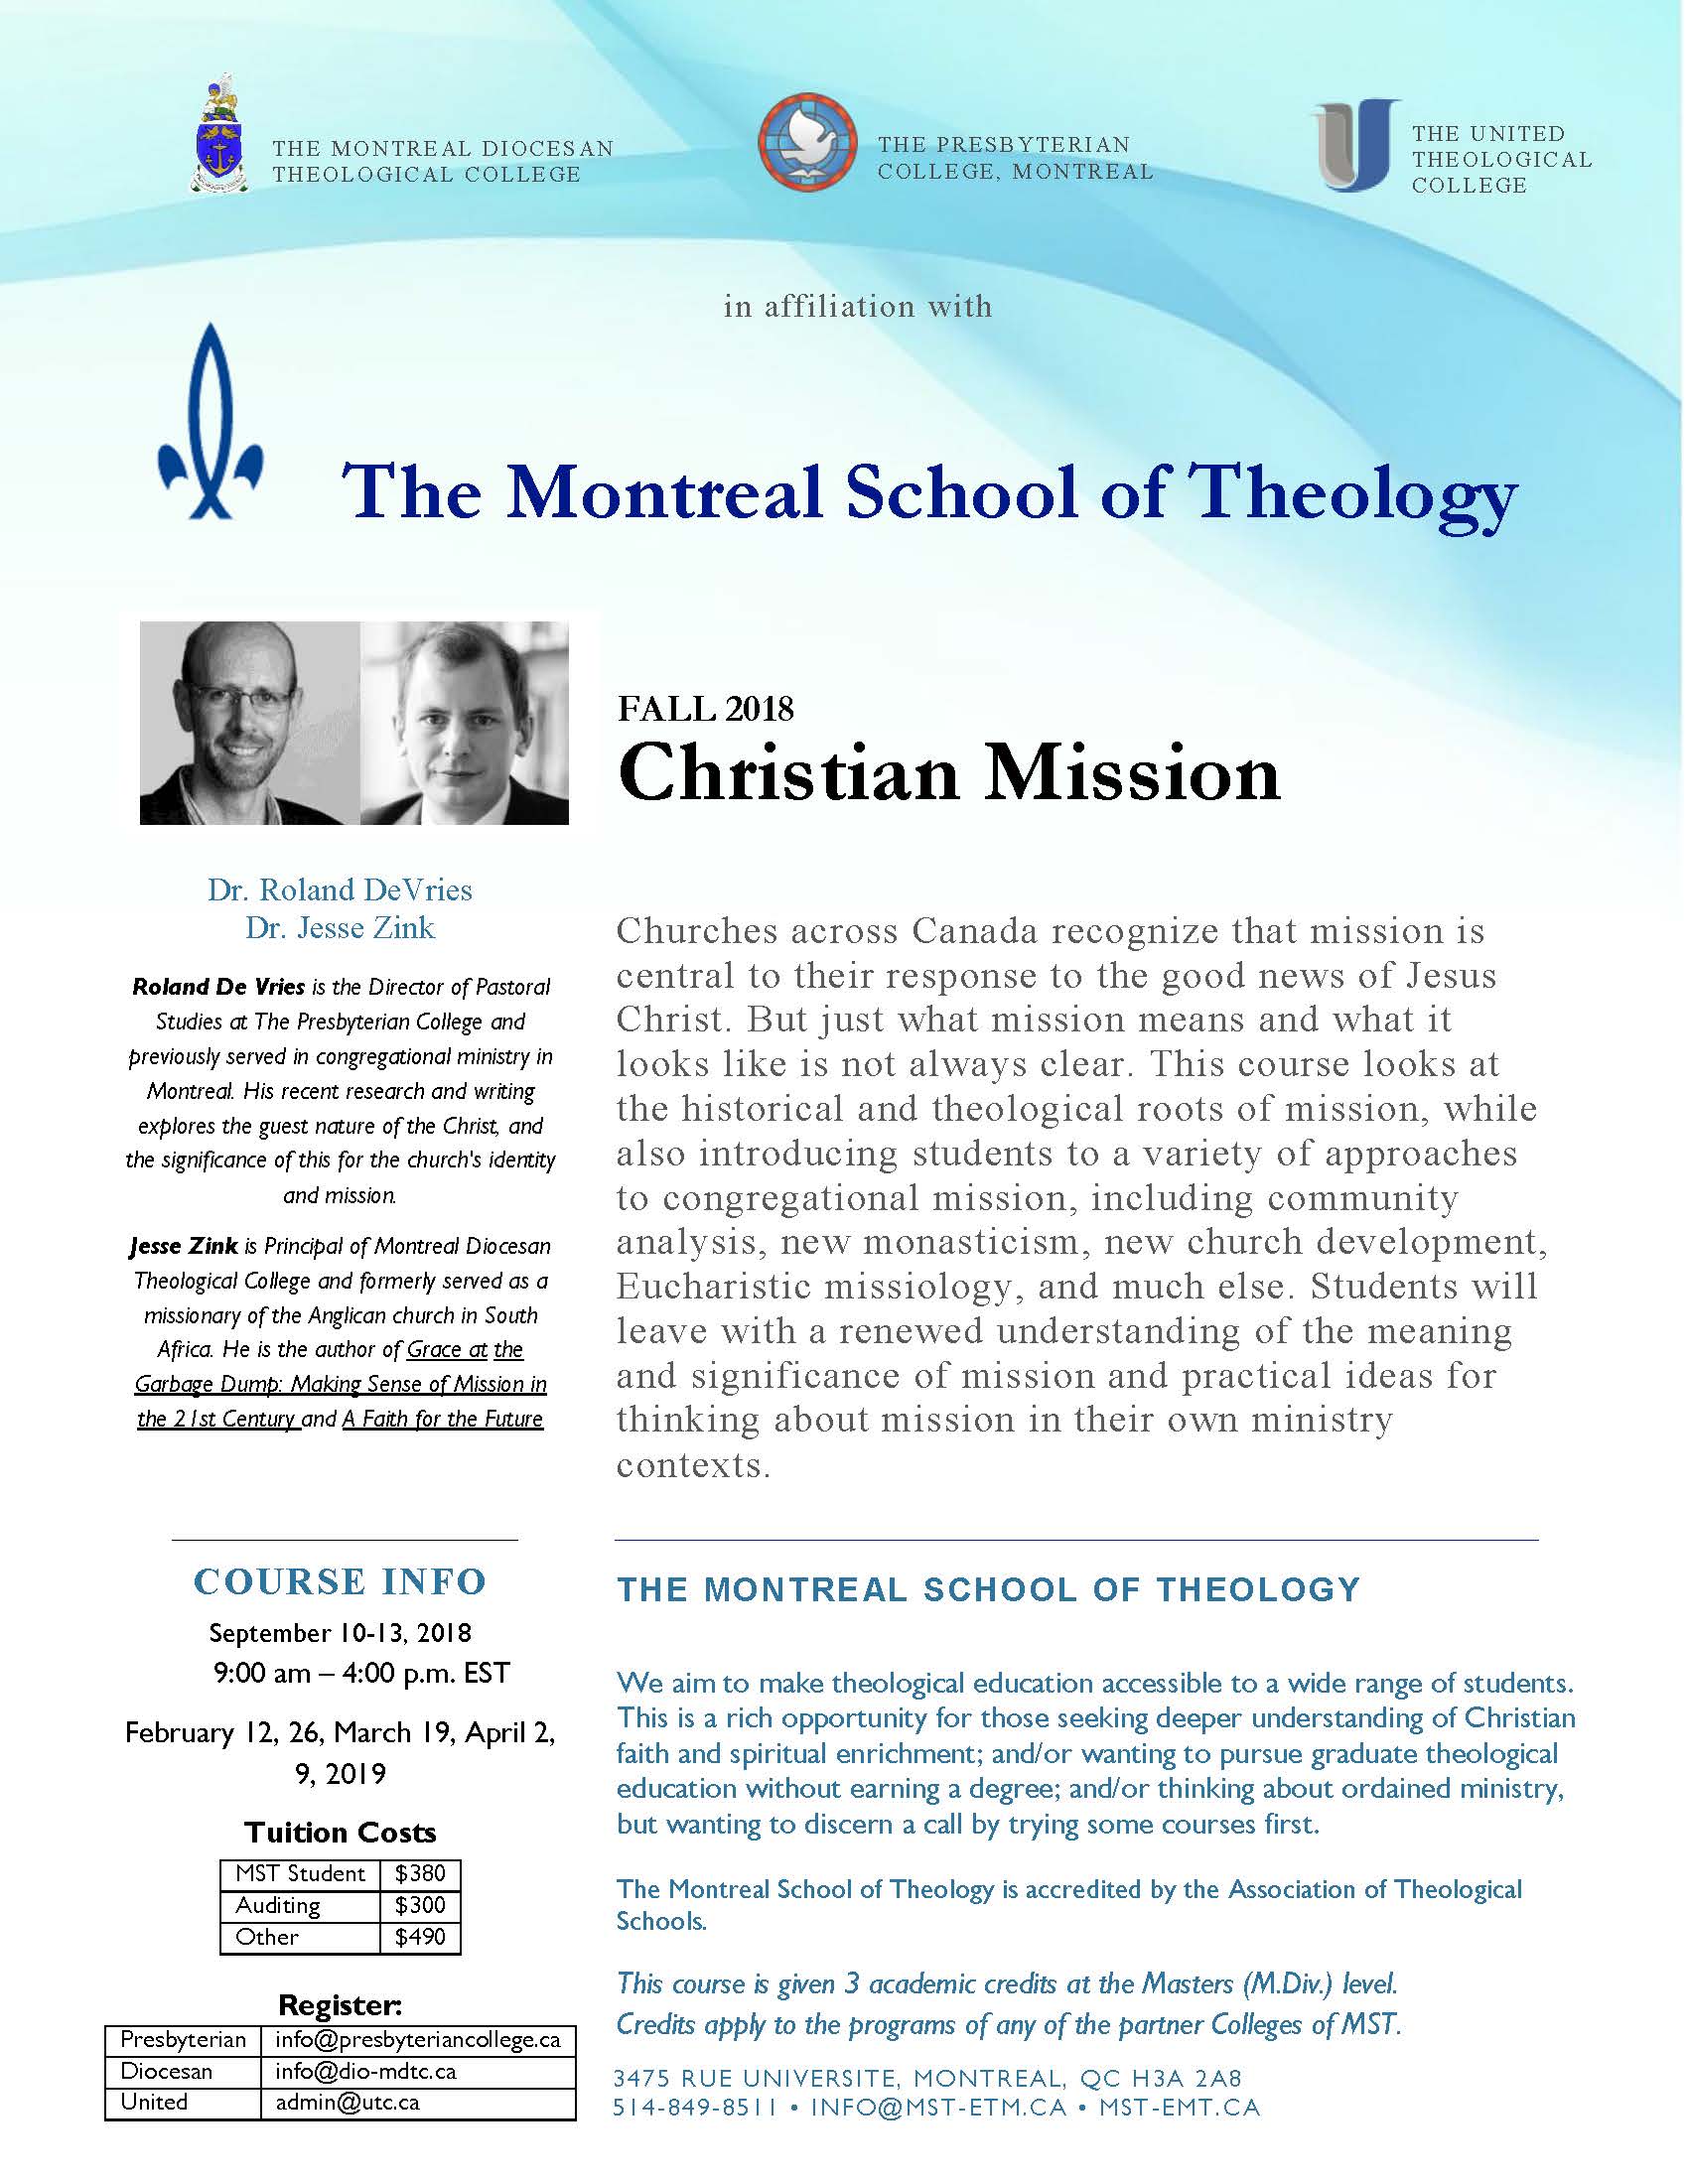 2018/2019 Course : Christian Mission